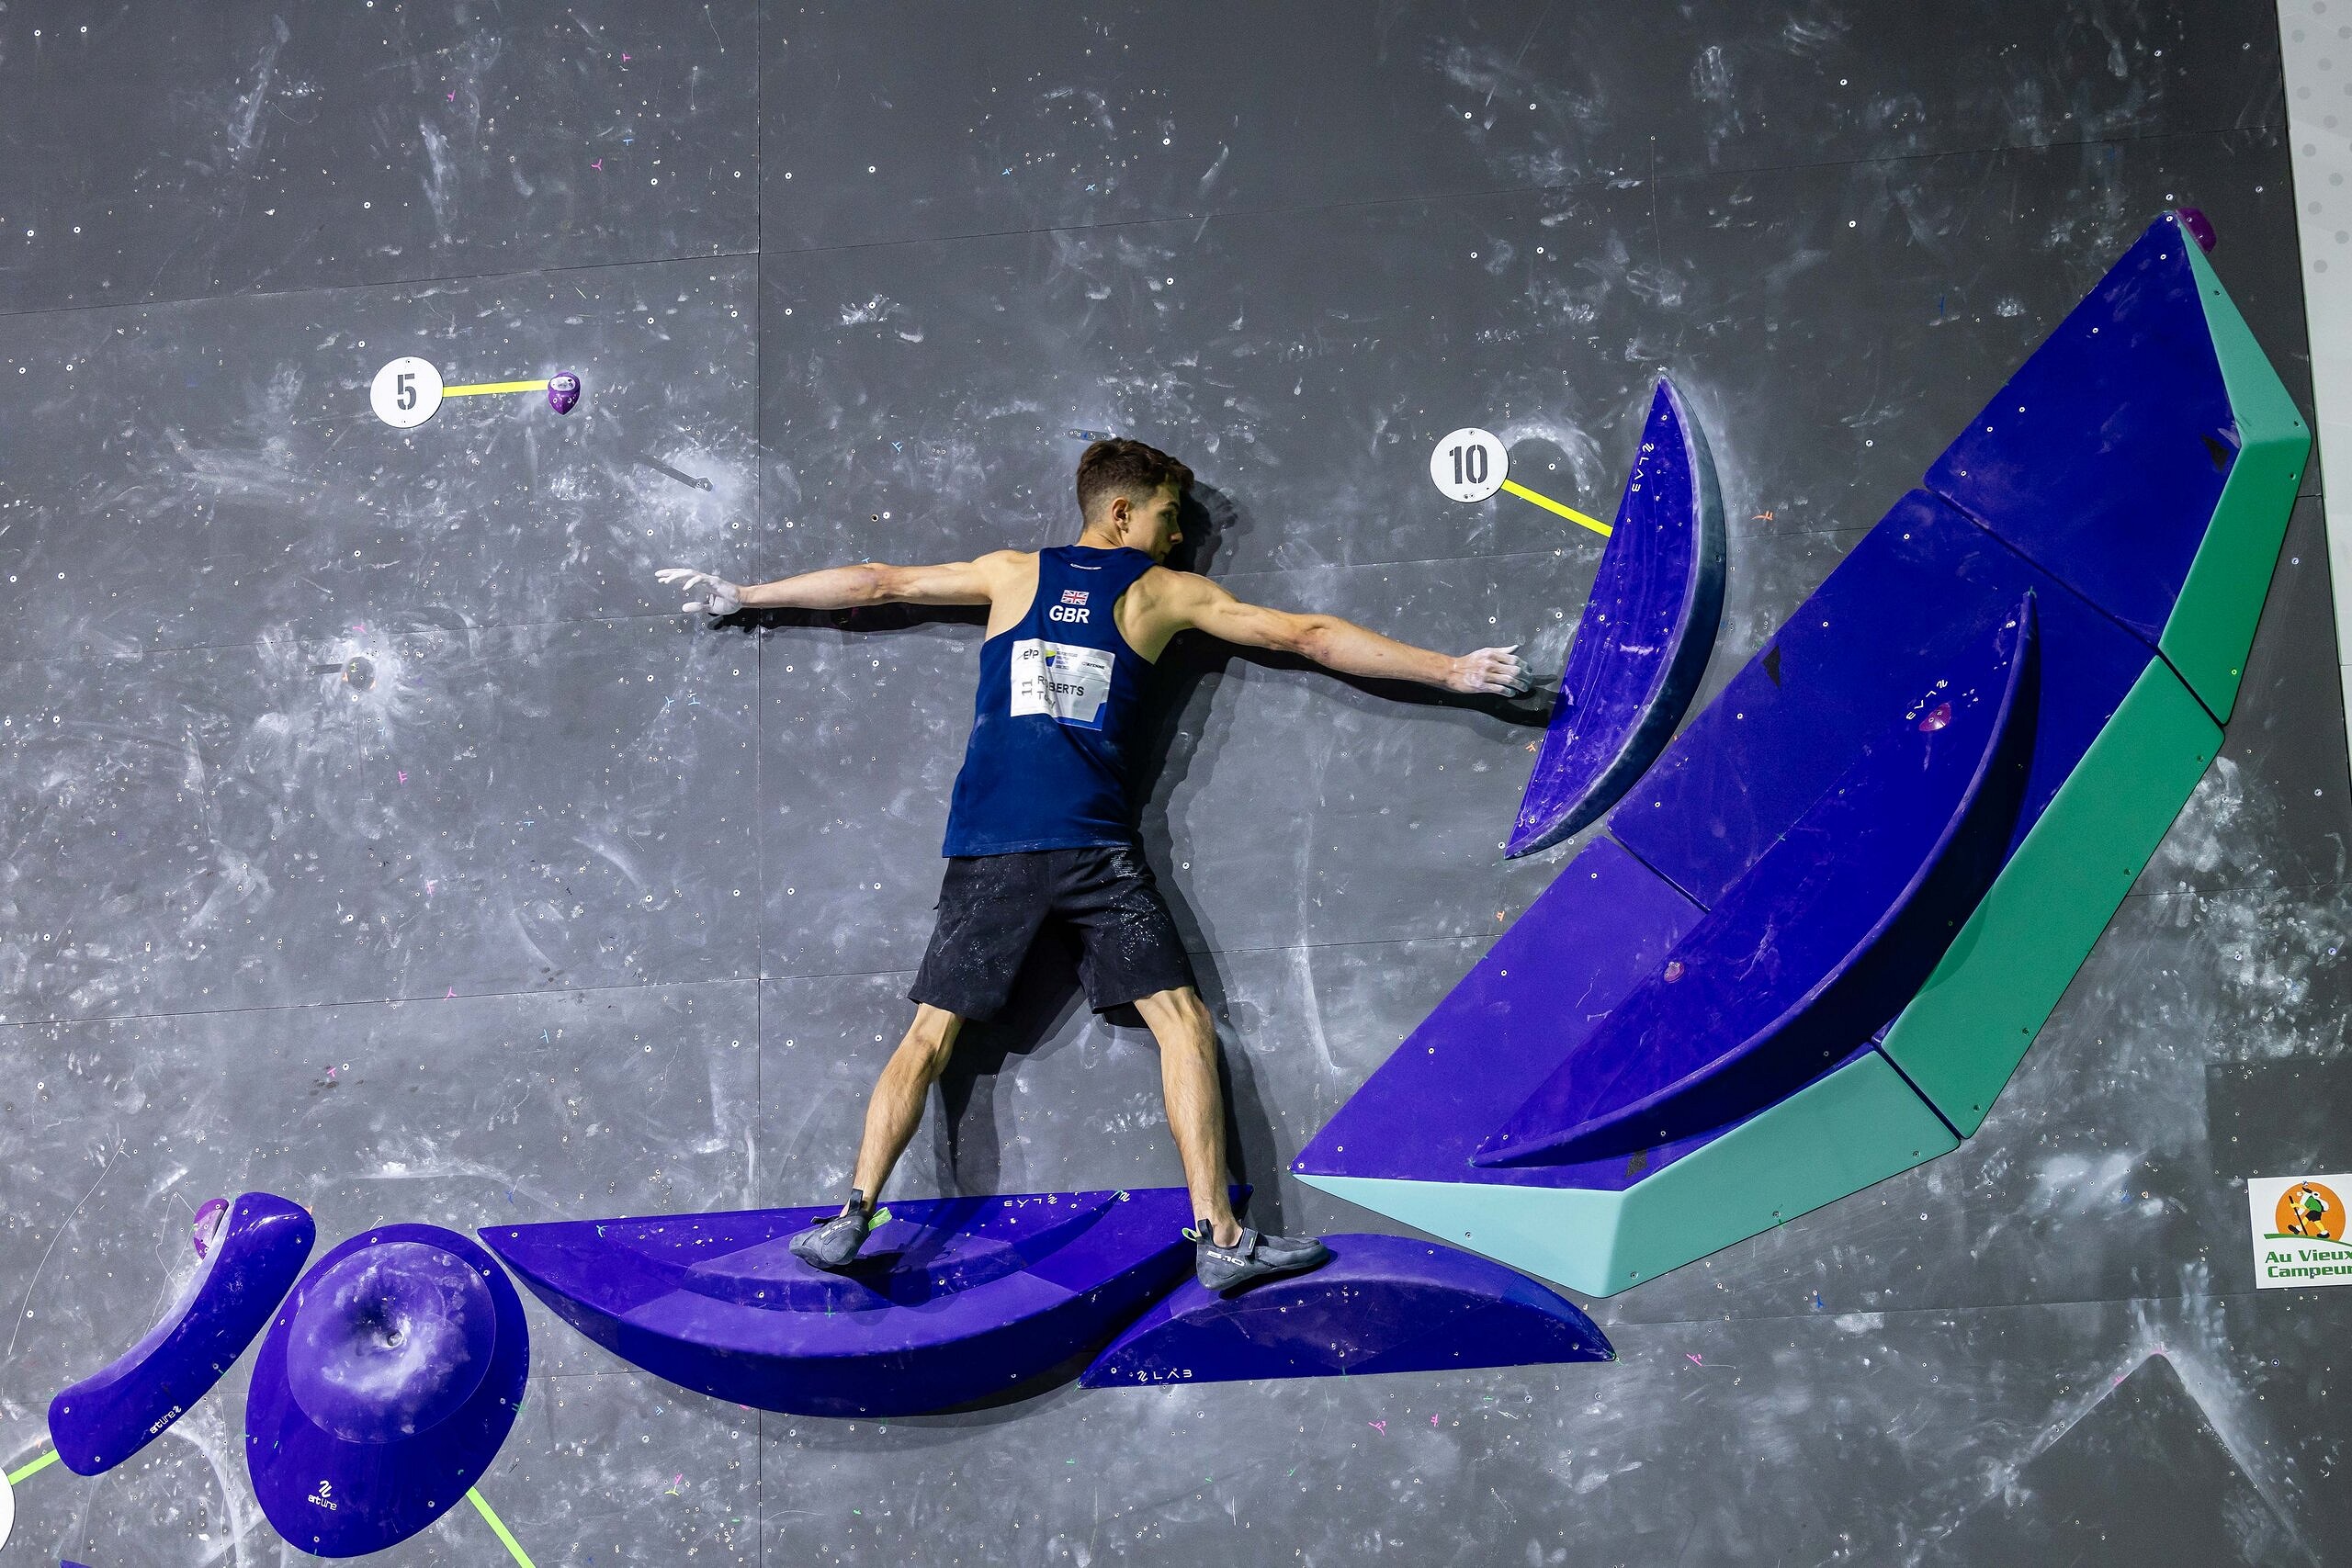 Toby Roberts balances his way to a win and an Olympic ticket.  © Jan Virt/IFSC